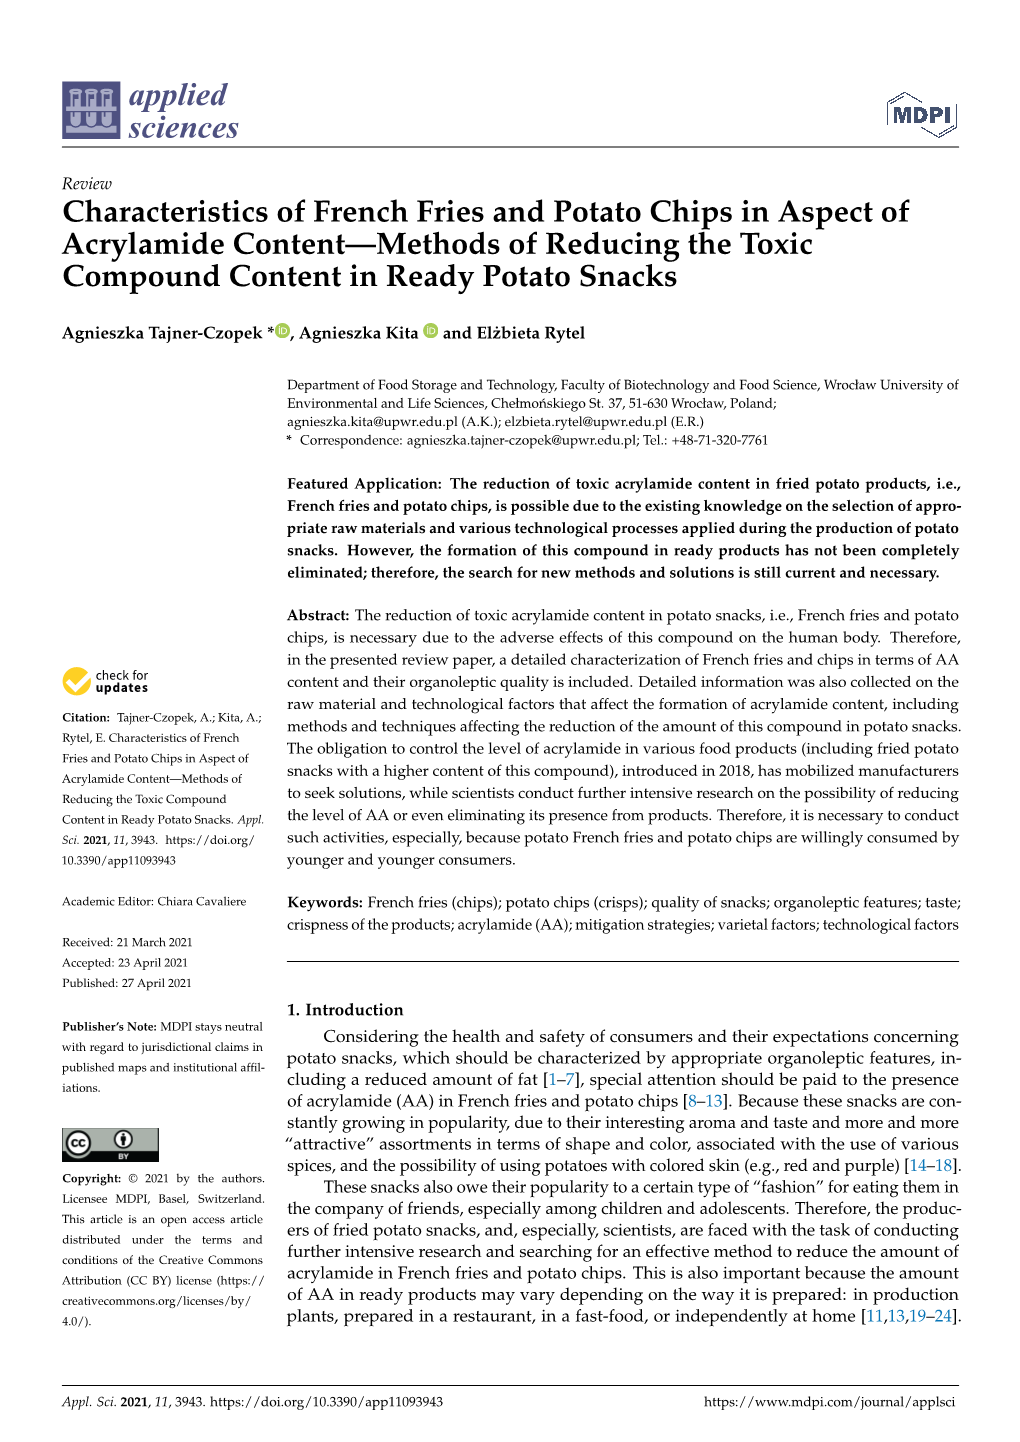 Characteristics of French Fries and Potato Chips in Aspect of Acrylamide Content—Methods of Reducing the Toxic Compound Content in Ready Potato Snacks